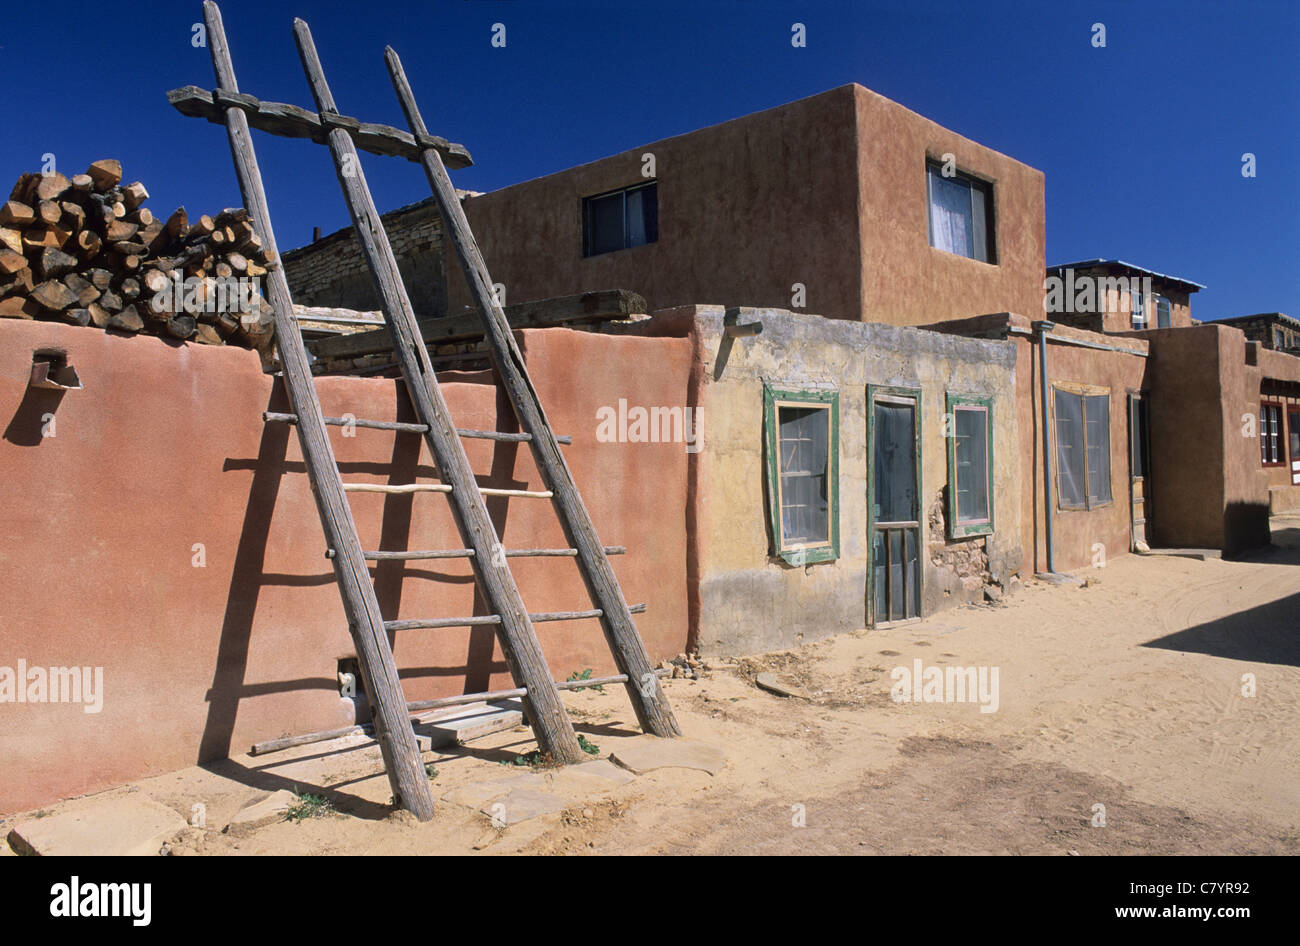 New Mexico, Acoma Indian Reservation, Acomo pueblo with ladders leading to roof tops Stock Photo